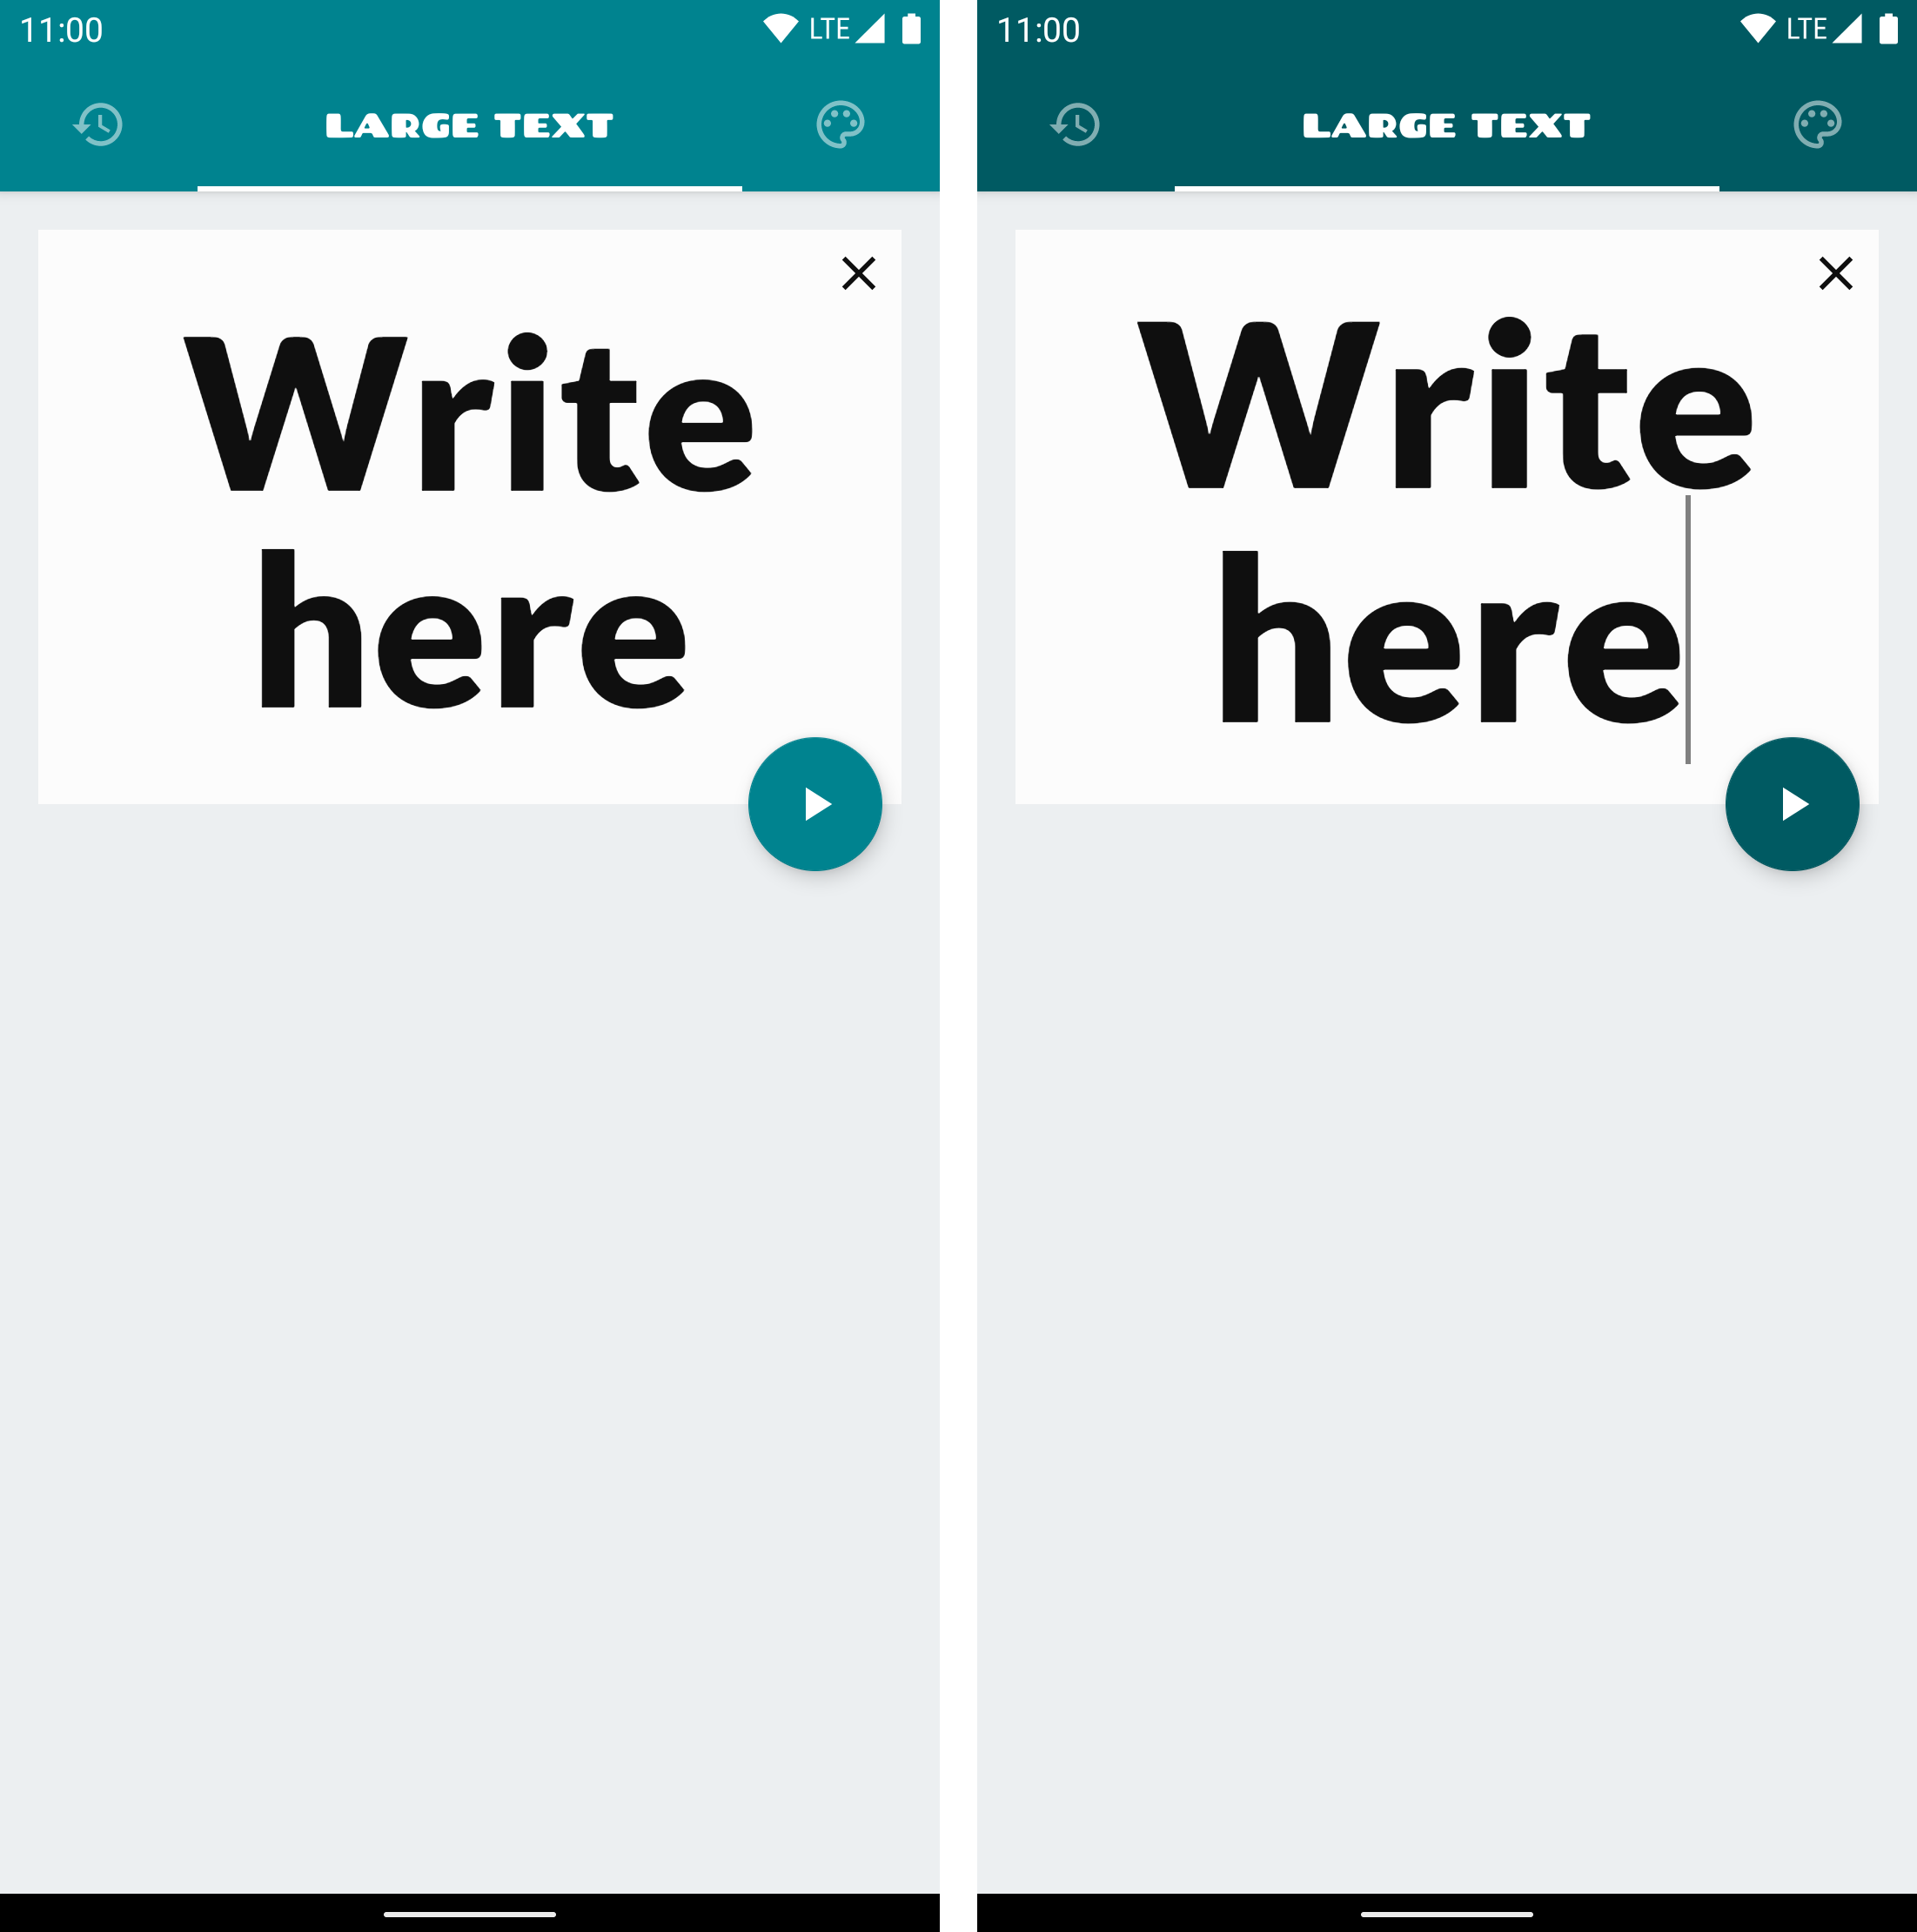 Making our Android App Accessible – Bloco